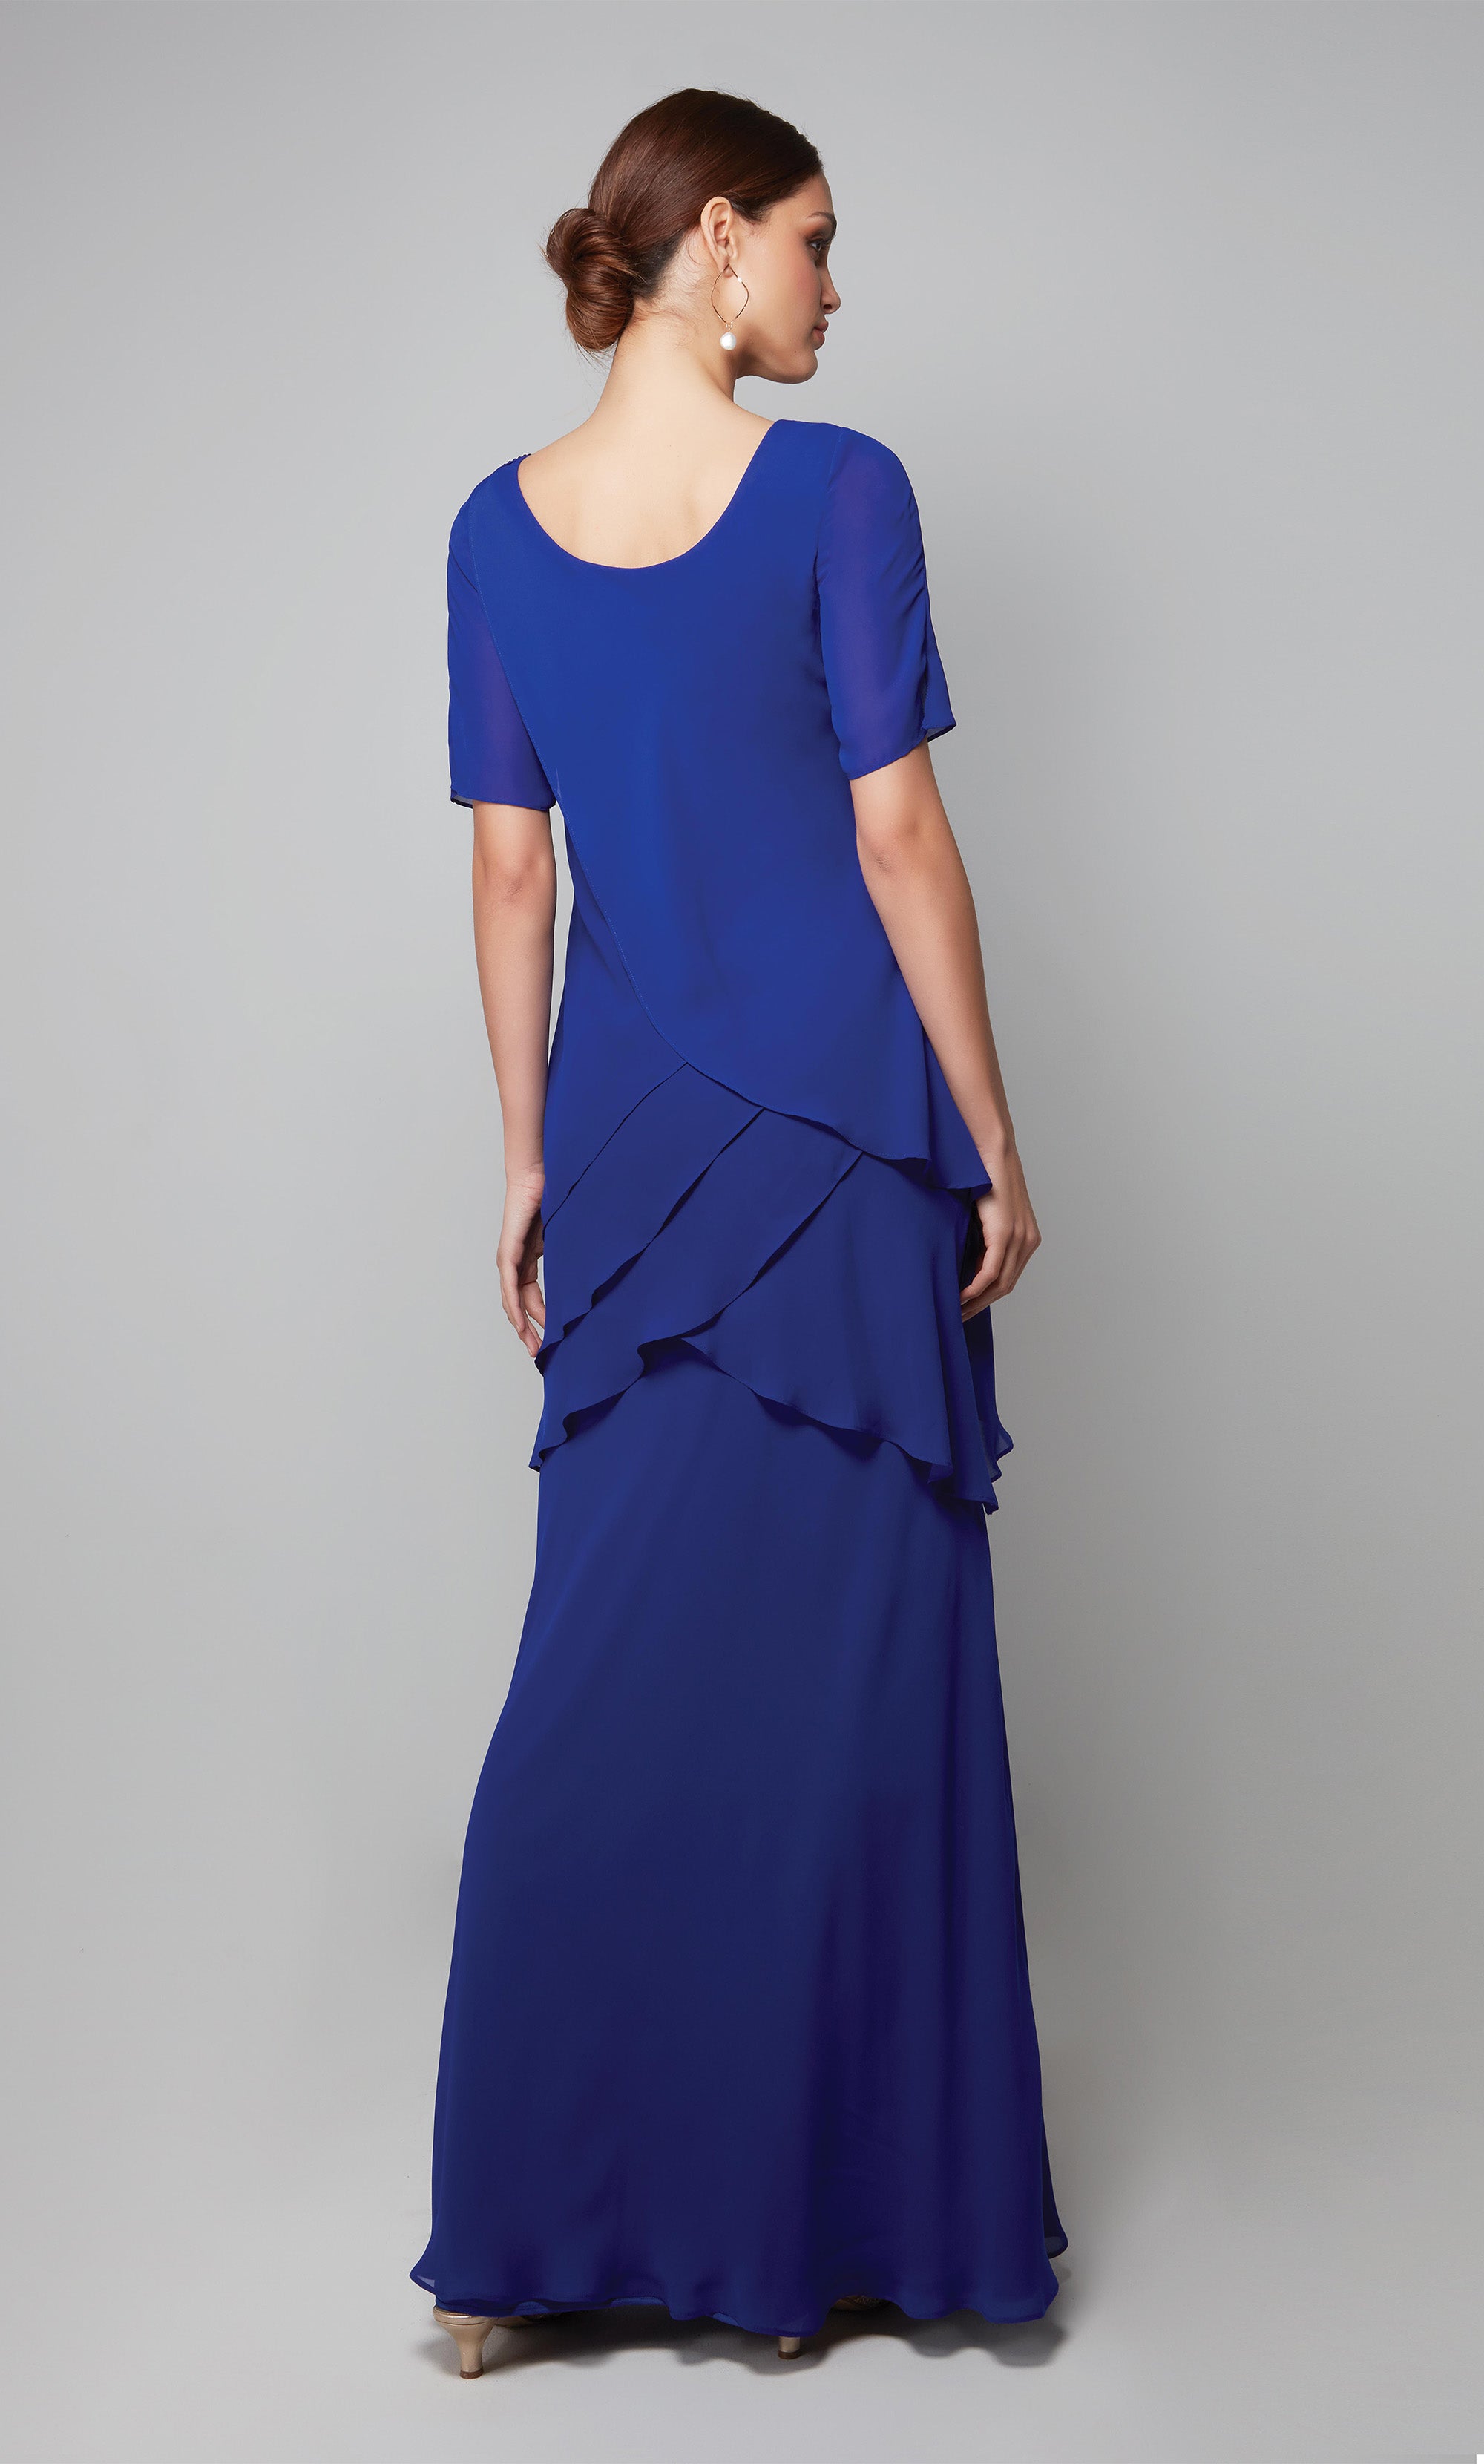 Chiffon elegant guest of wedding dress with short sleeves in cobalt blue. Color-SWATCH_27593__COBALT